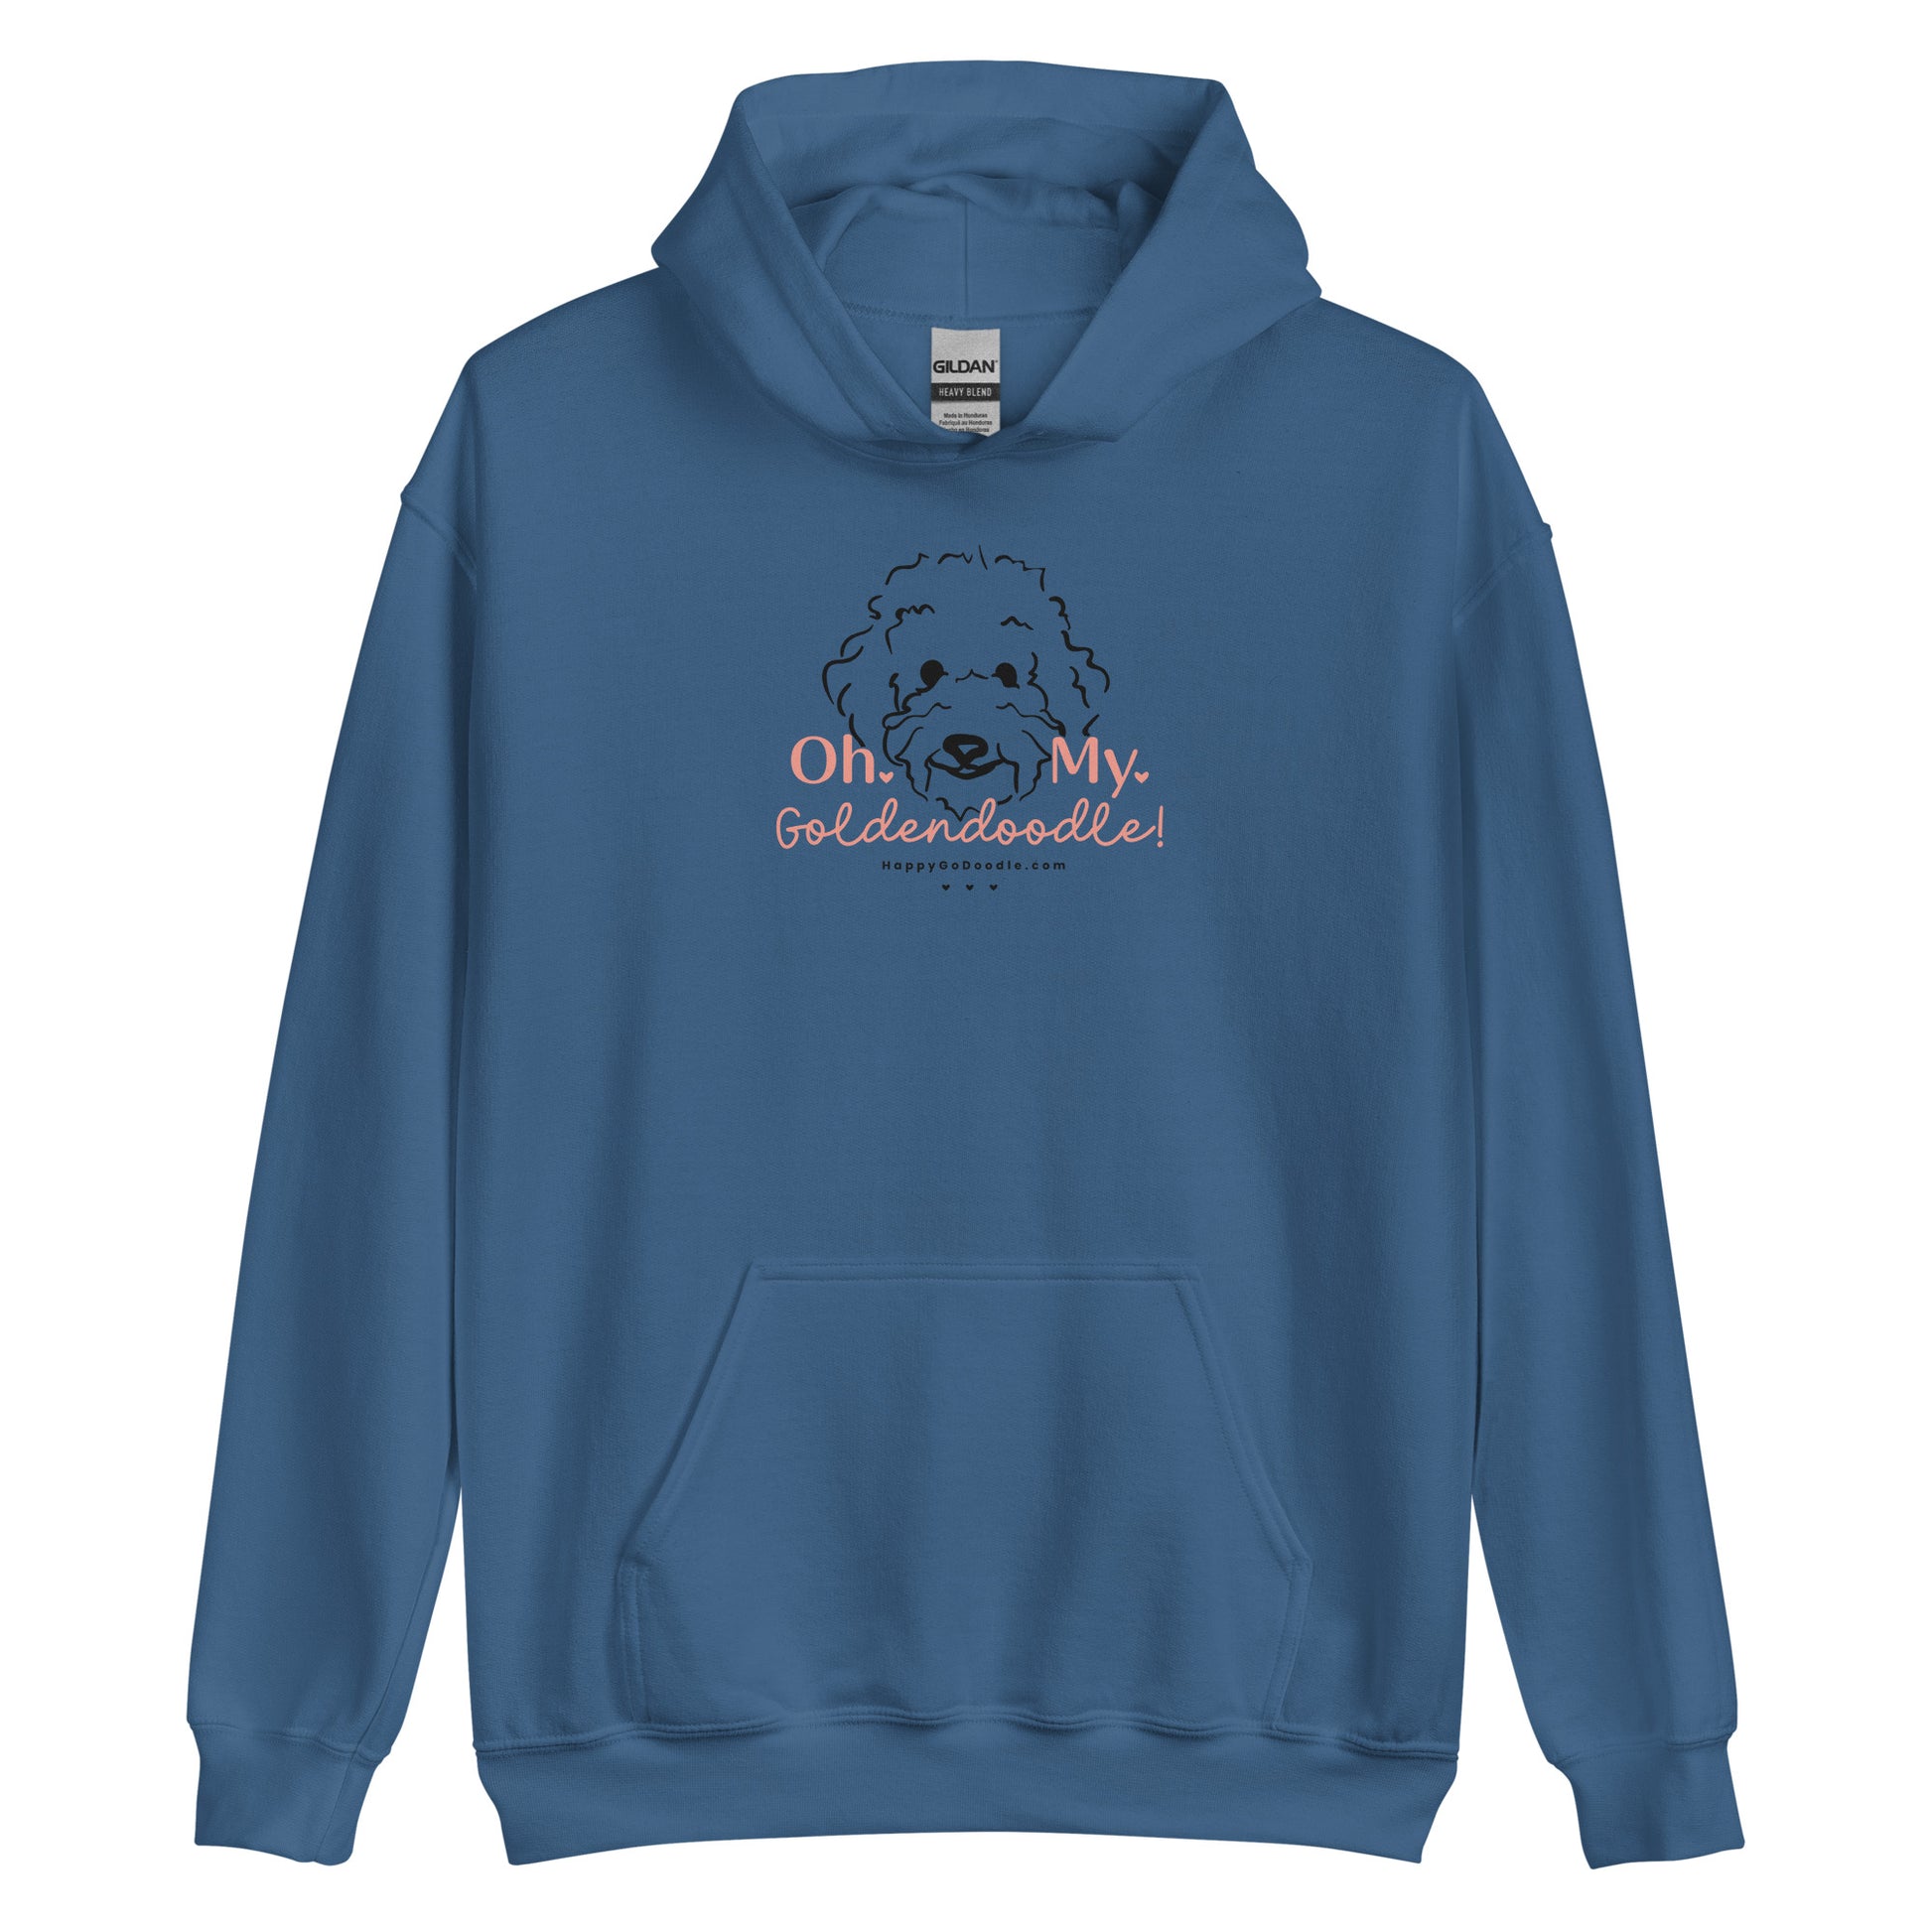 Goldendoodle hoodie with Goldendoodle dog face and words "Oh My Goldendoodle" in  indigo blue